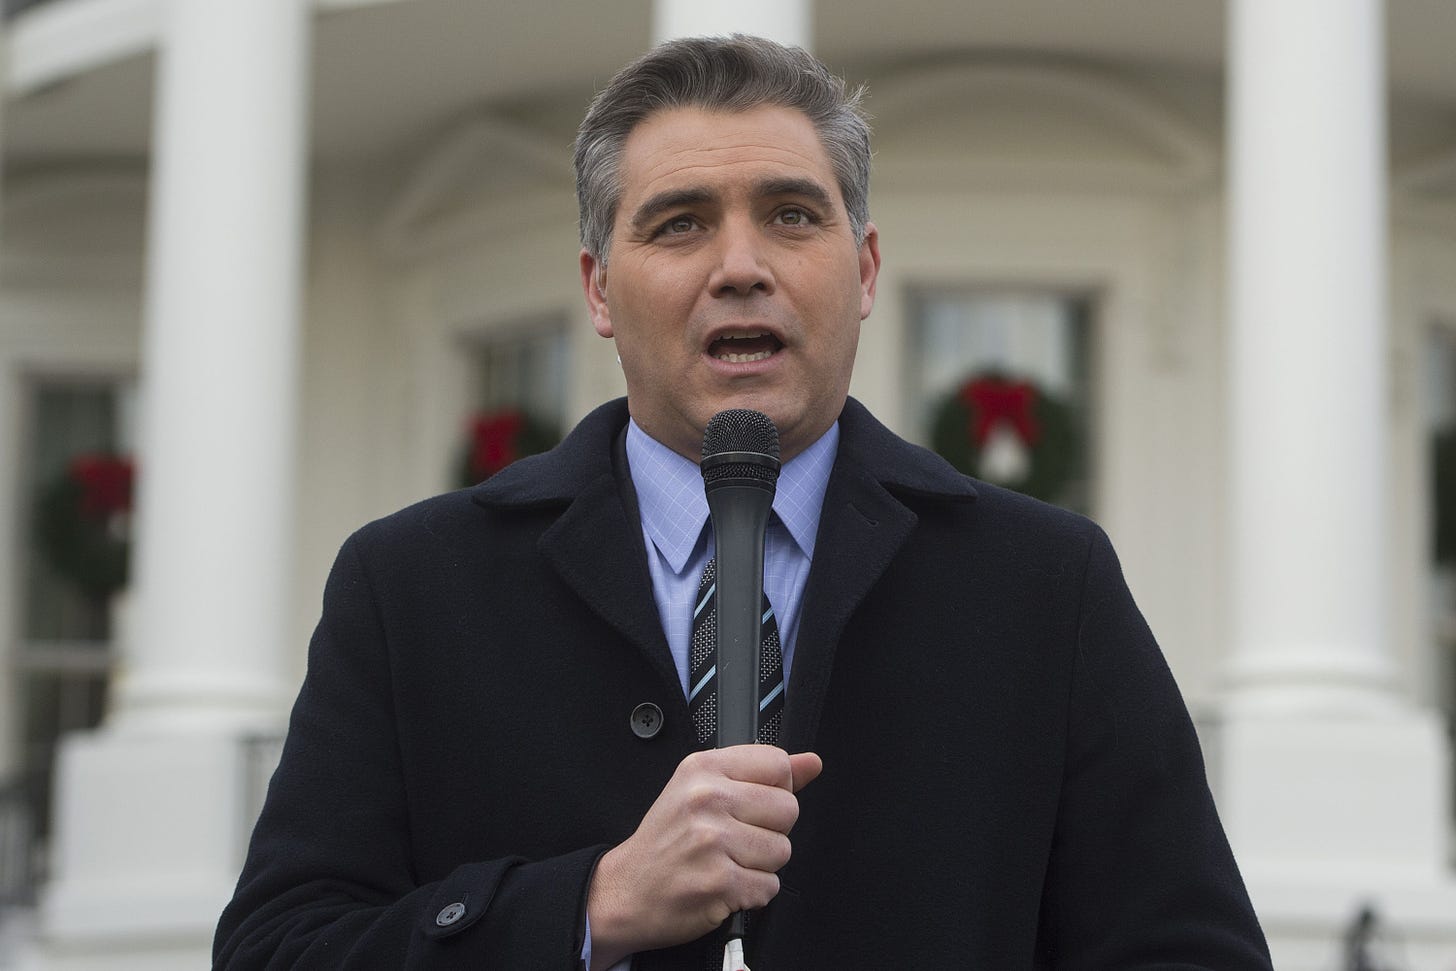 Jim Acosta violated one of the oldest rules of journalism